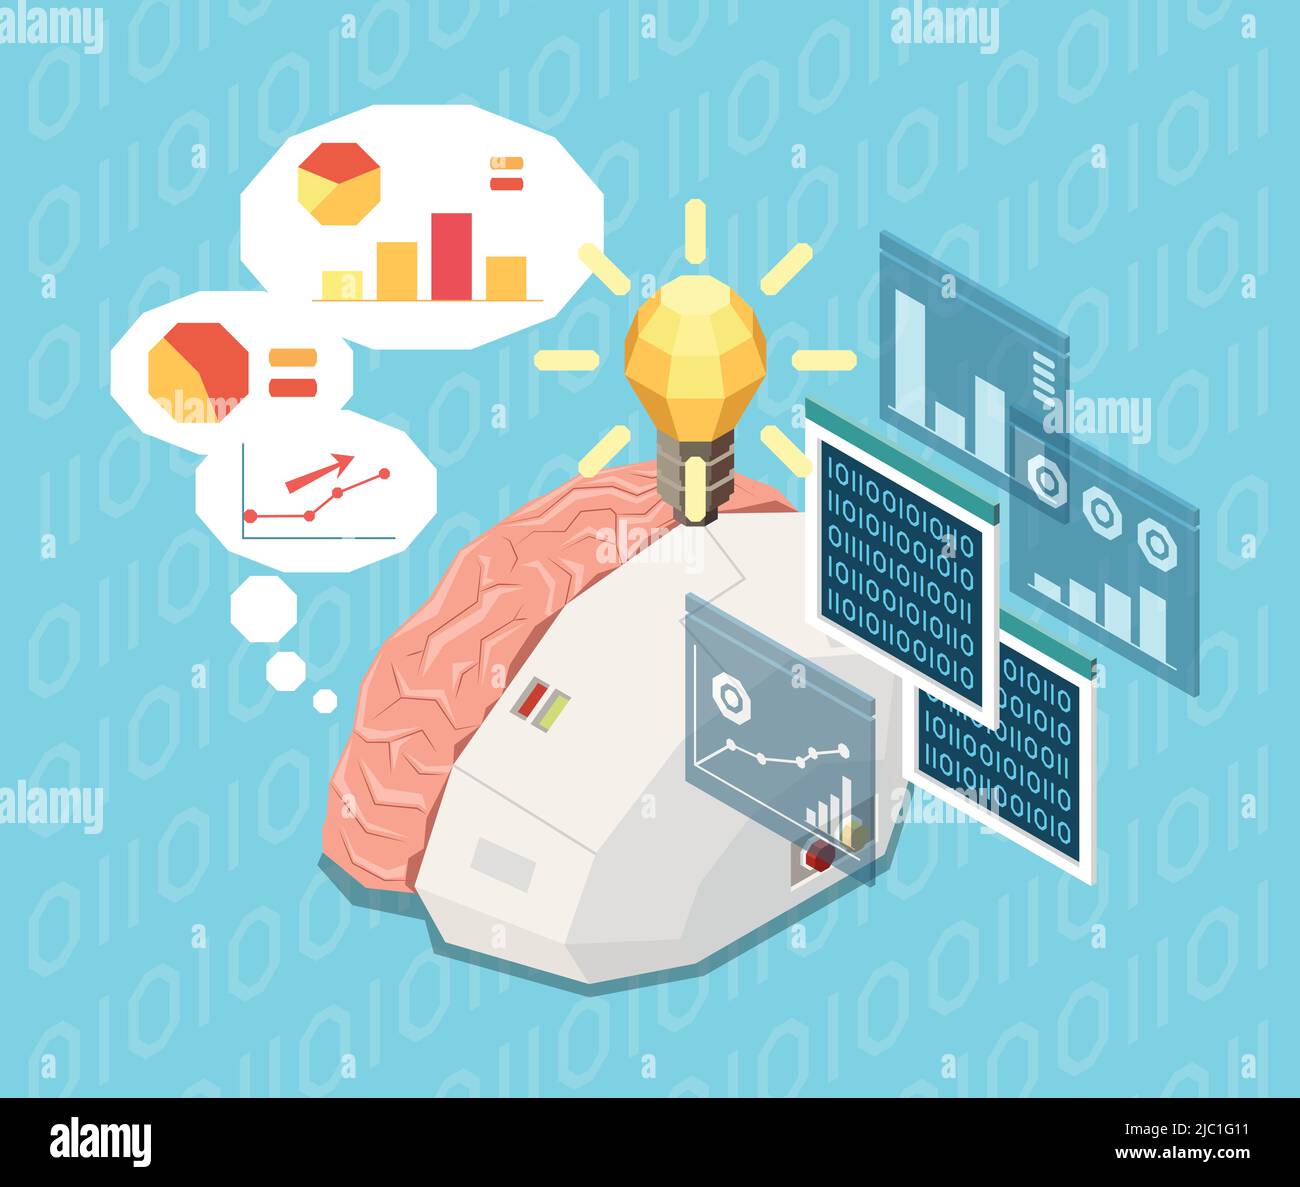 Artificial intelligence isometric composition with image of half electronic human brain thinking of graphs and data vector illustration Stock Vector